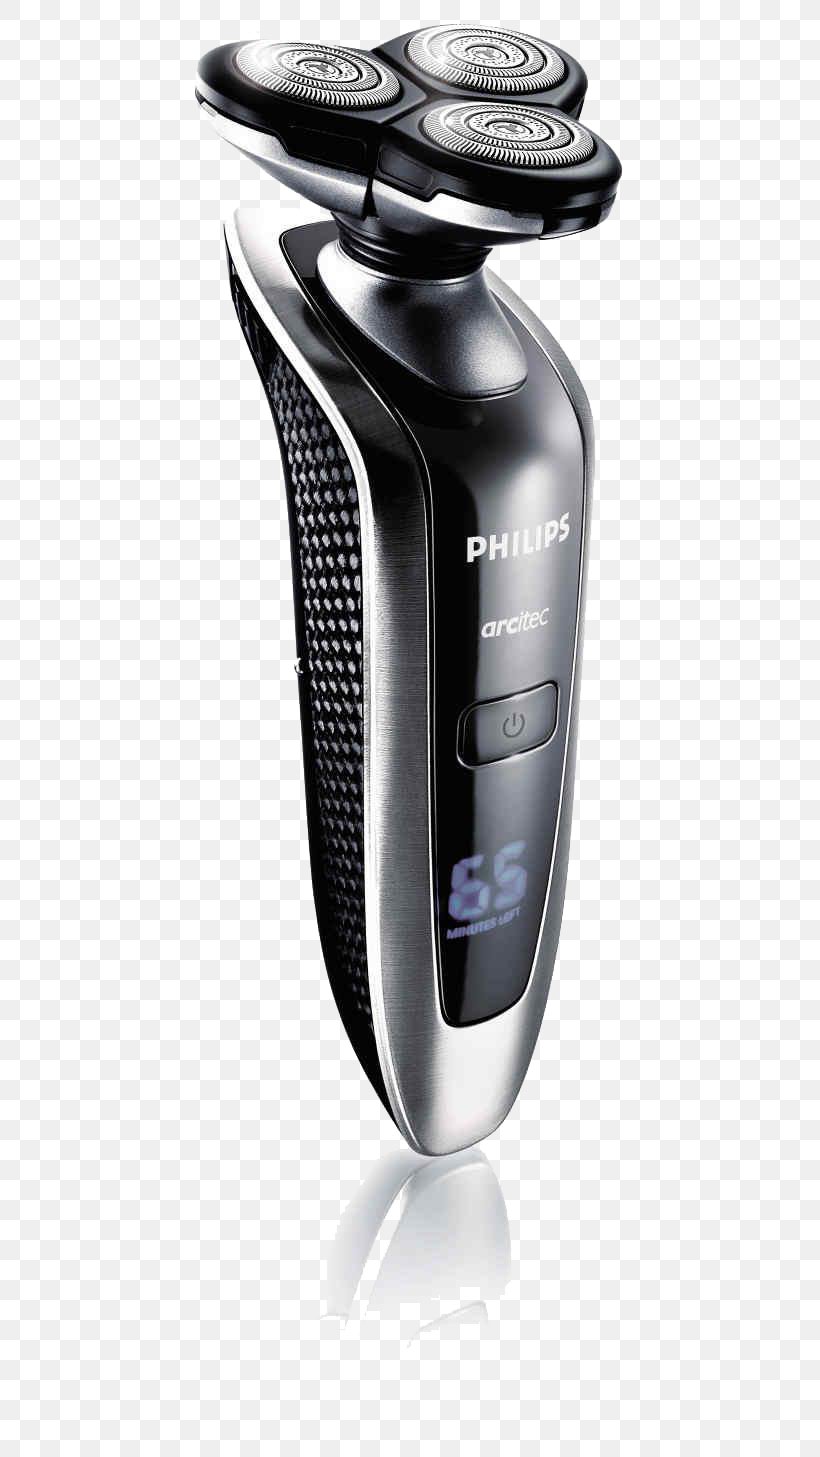 Head Shaving Norelco Electric Razor Philips, PNG, 500x1457px, Philips, Beard, Cutting, Electric Razors Hair Trimmers, Hair Download Free